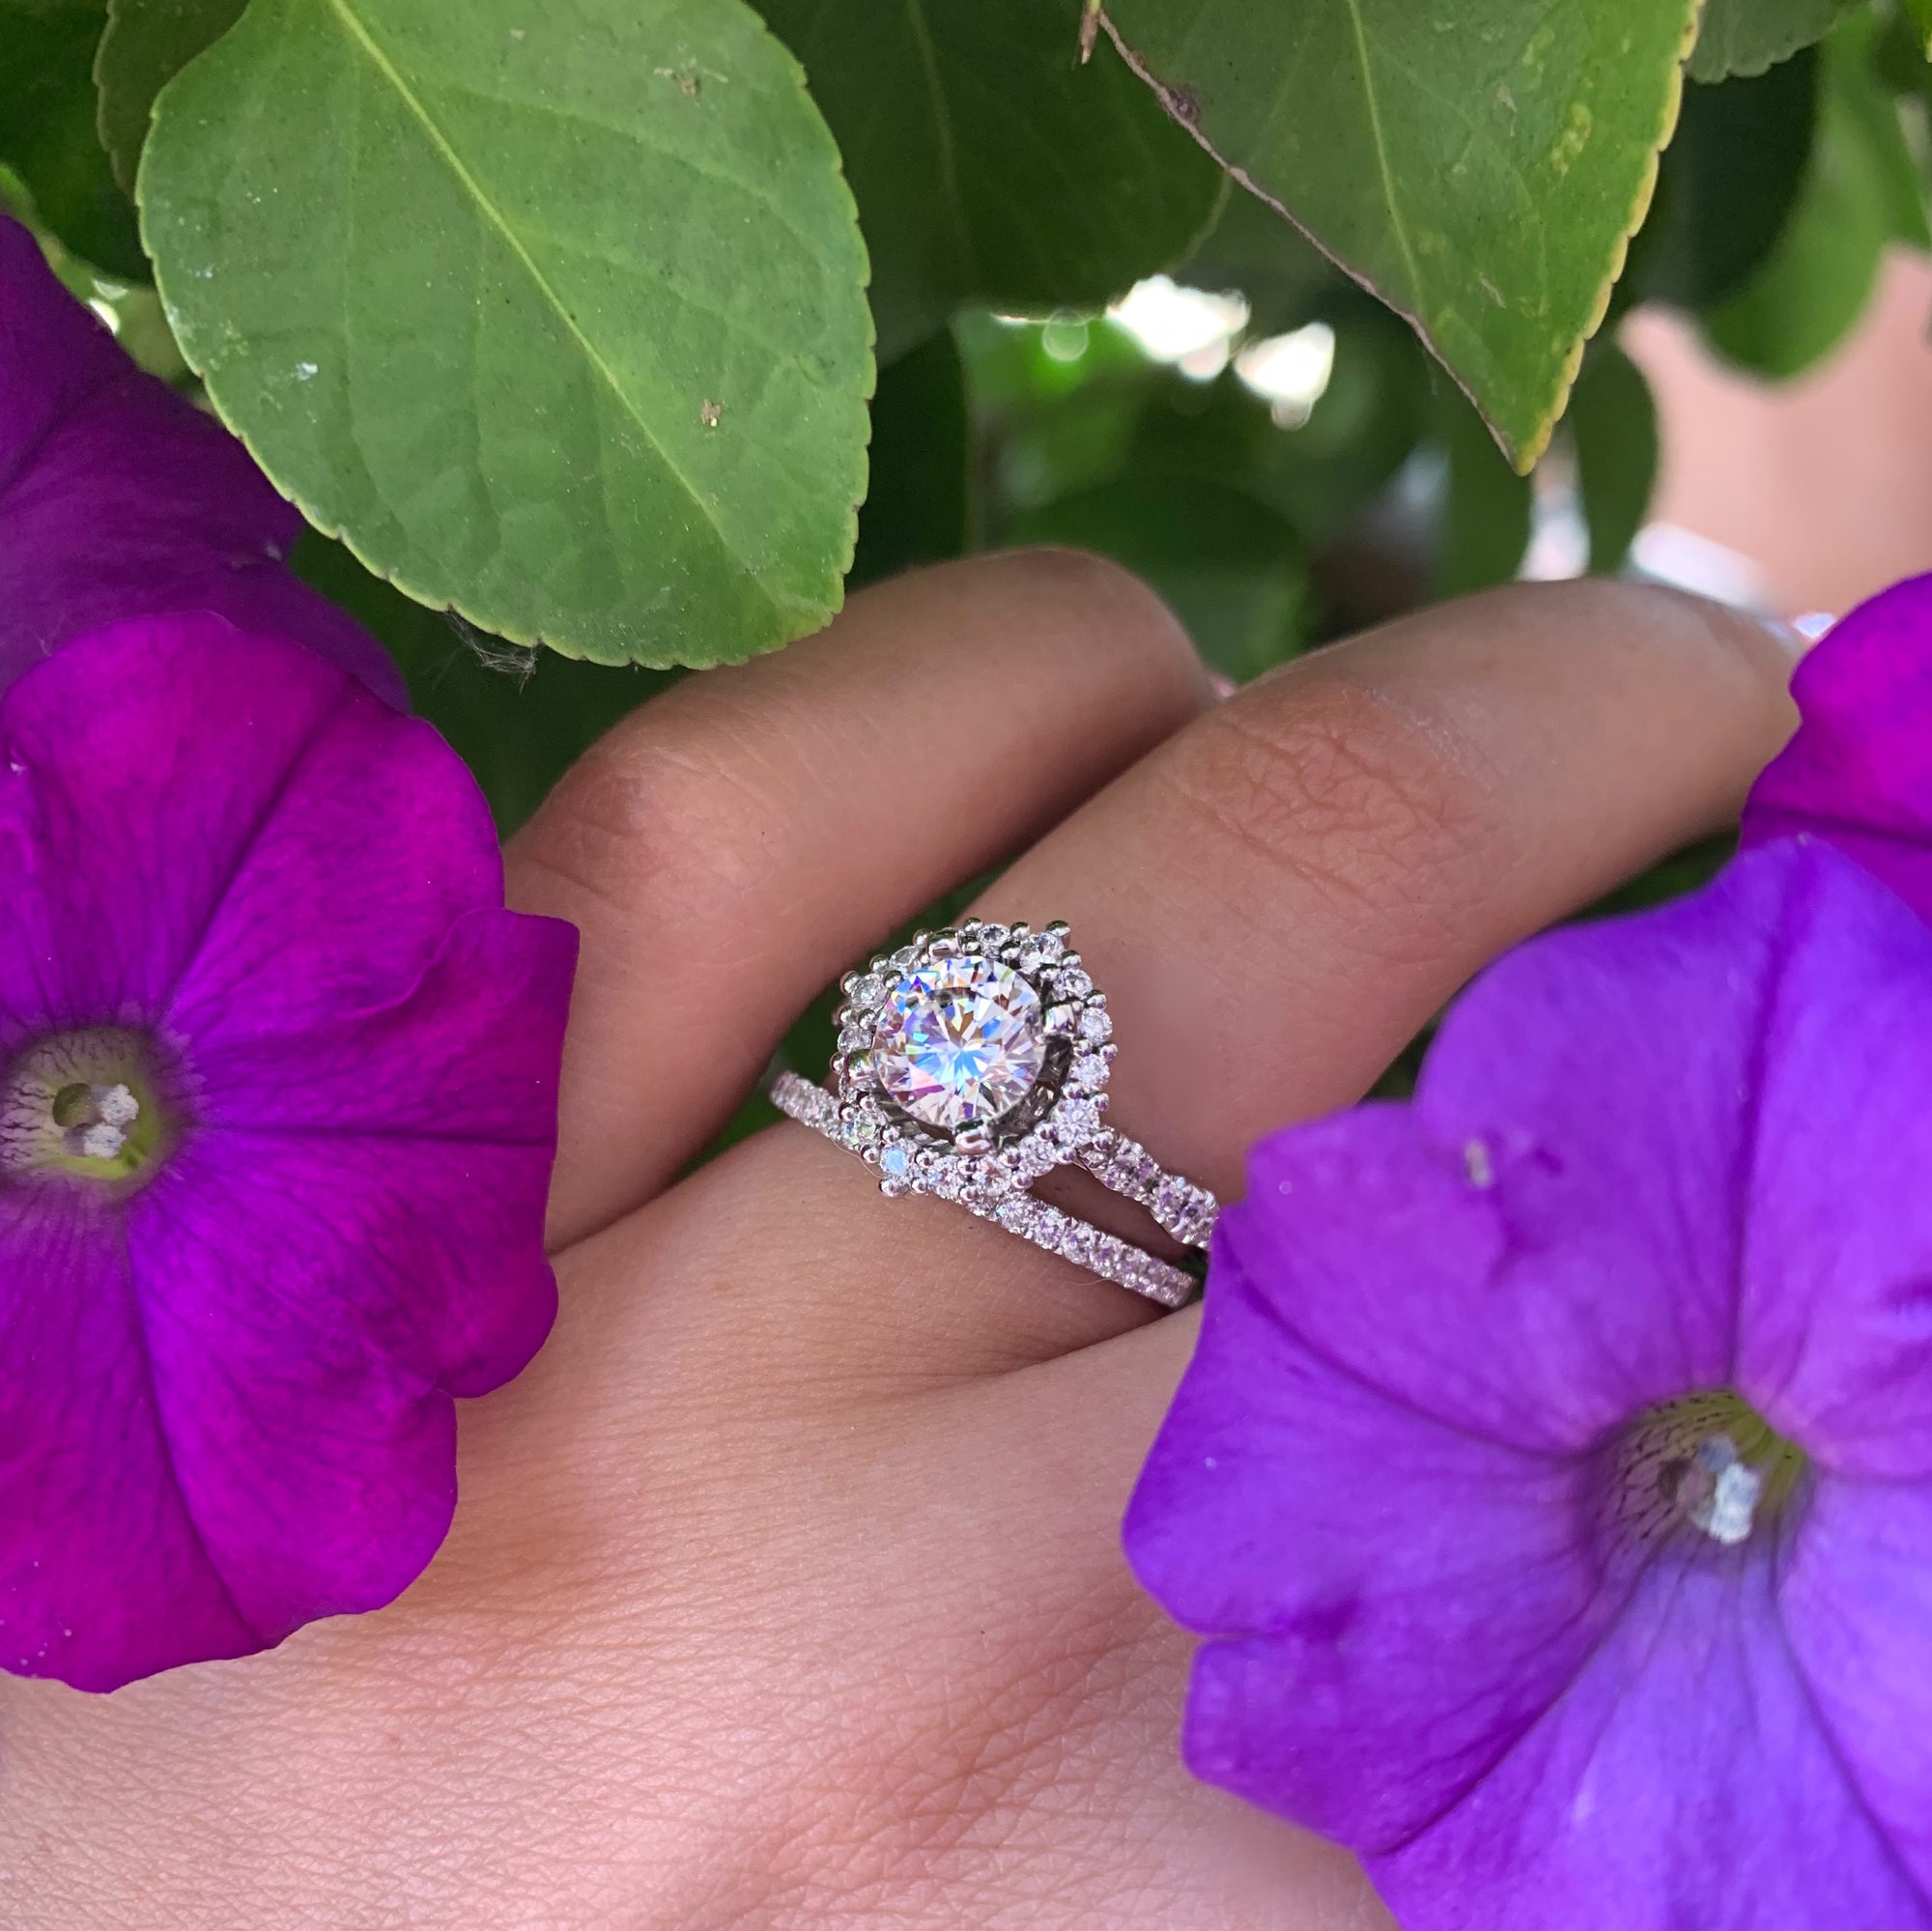 Nouveau Diamond Engagement Ring in White, Yellow or Rose Gold - Talisman Collection Fine Jewelers